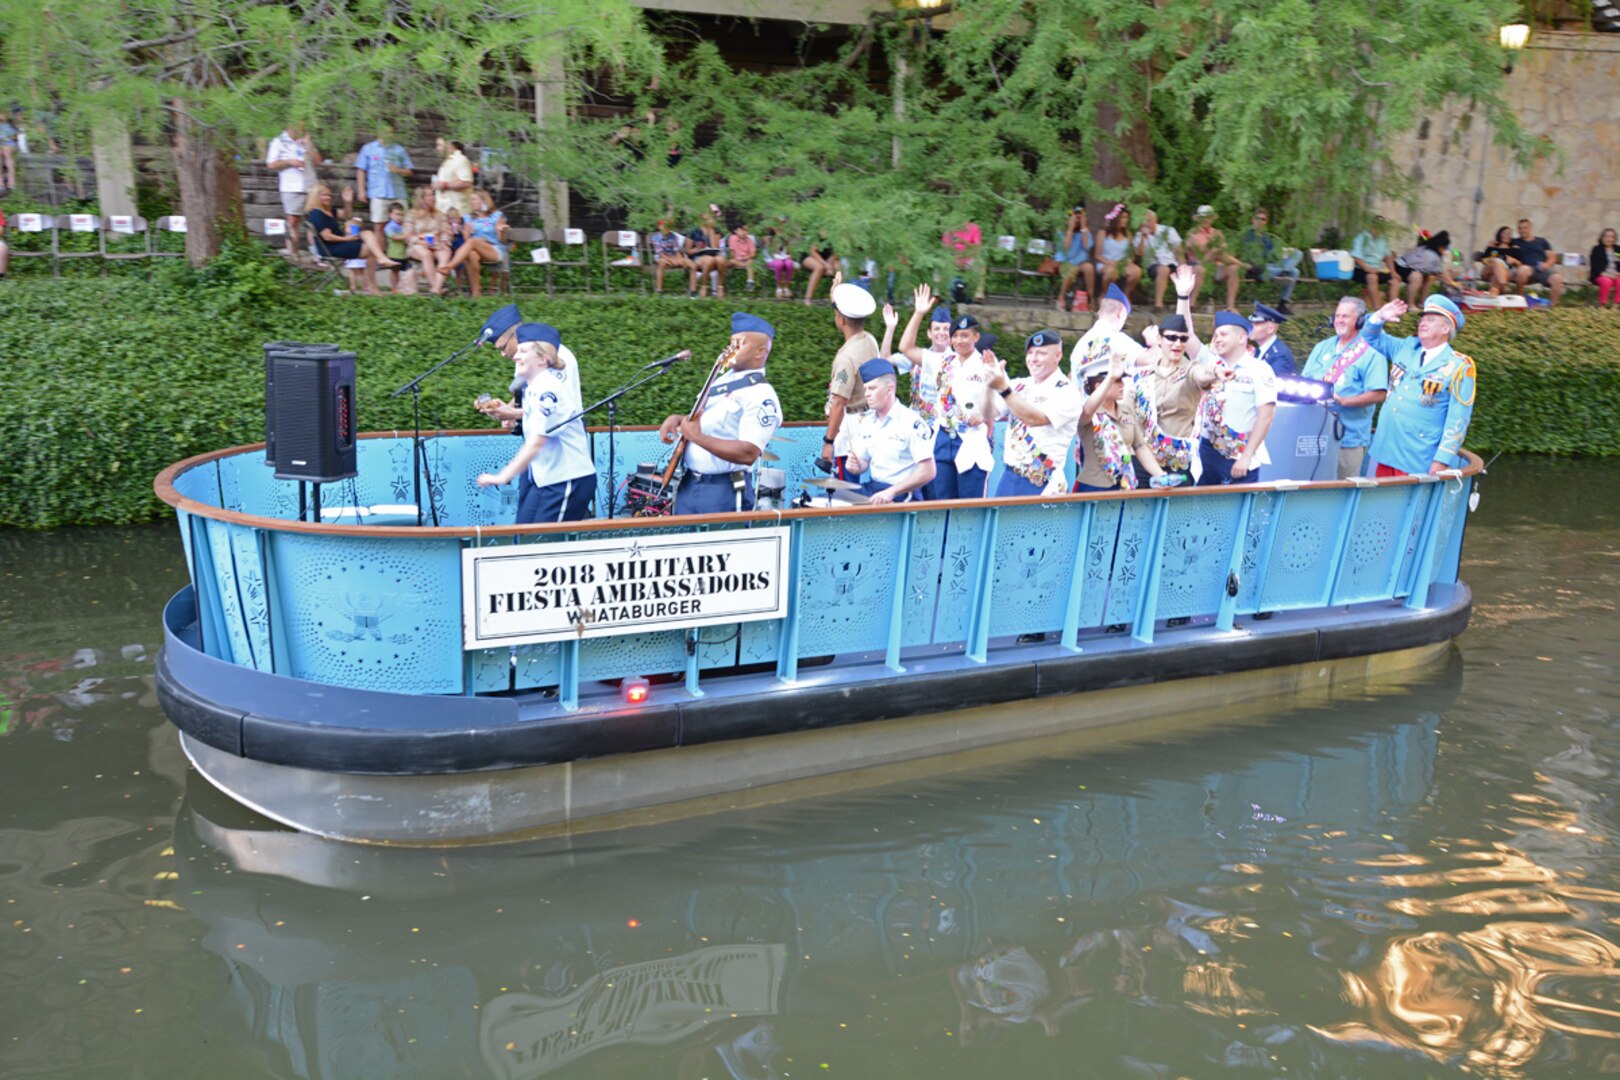 Military representatives from throughout San Antonio took part in the Texas Cavalier River Parade. The parade is one of the key events during Fiesta San Antonio and dates back to 1941. It runs along the River Walk in downtown San Antonio.